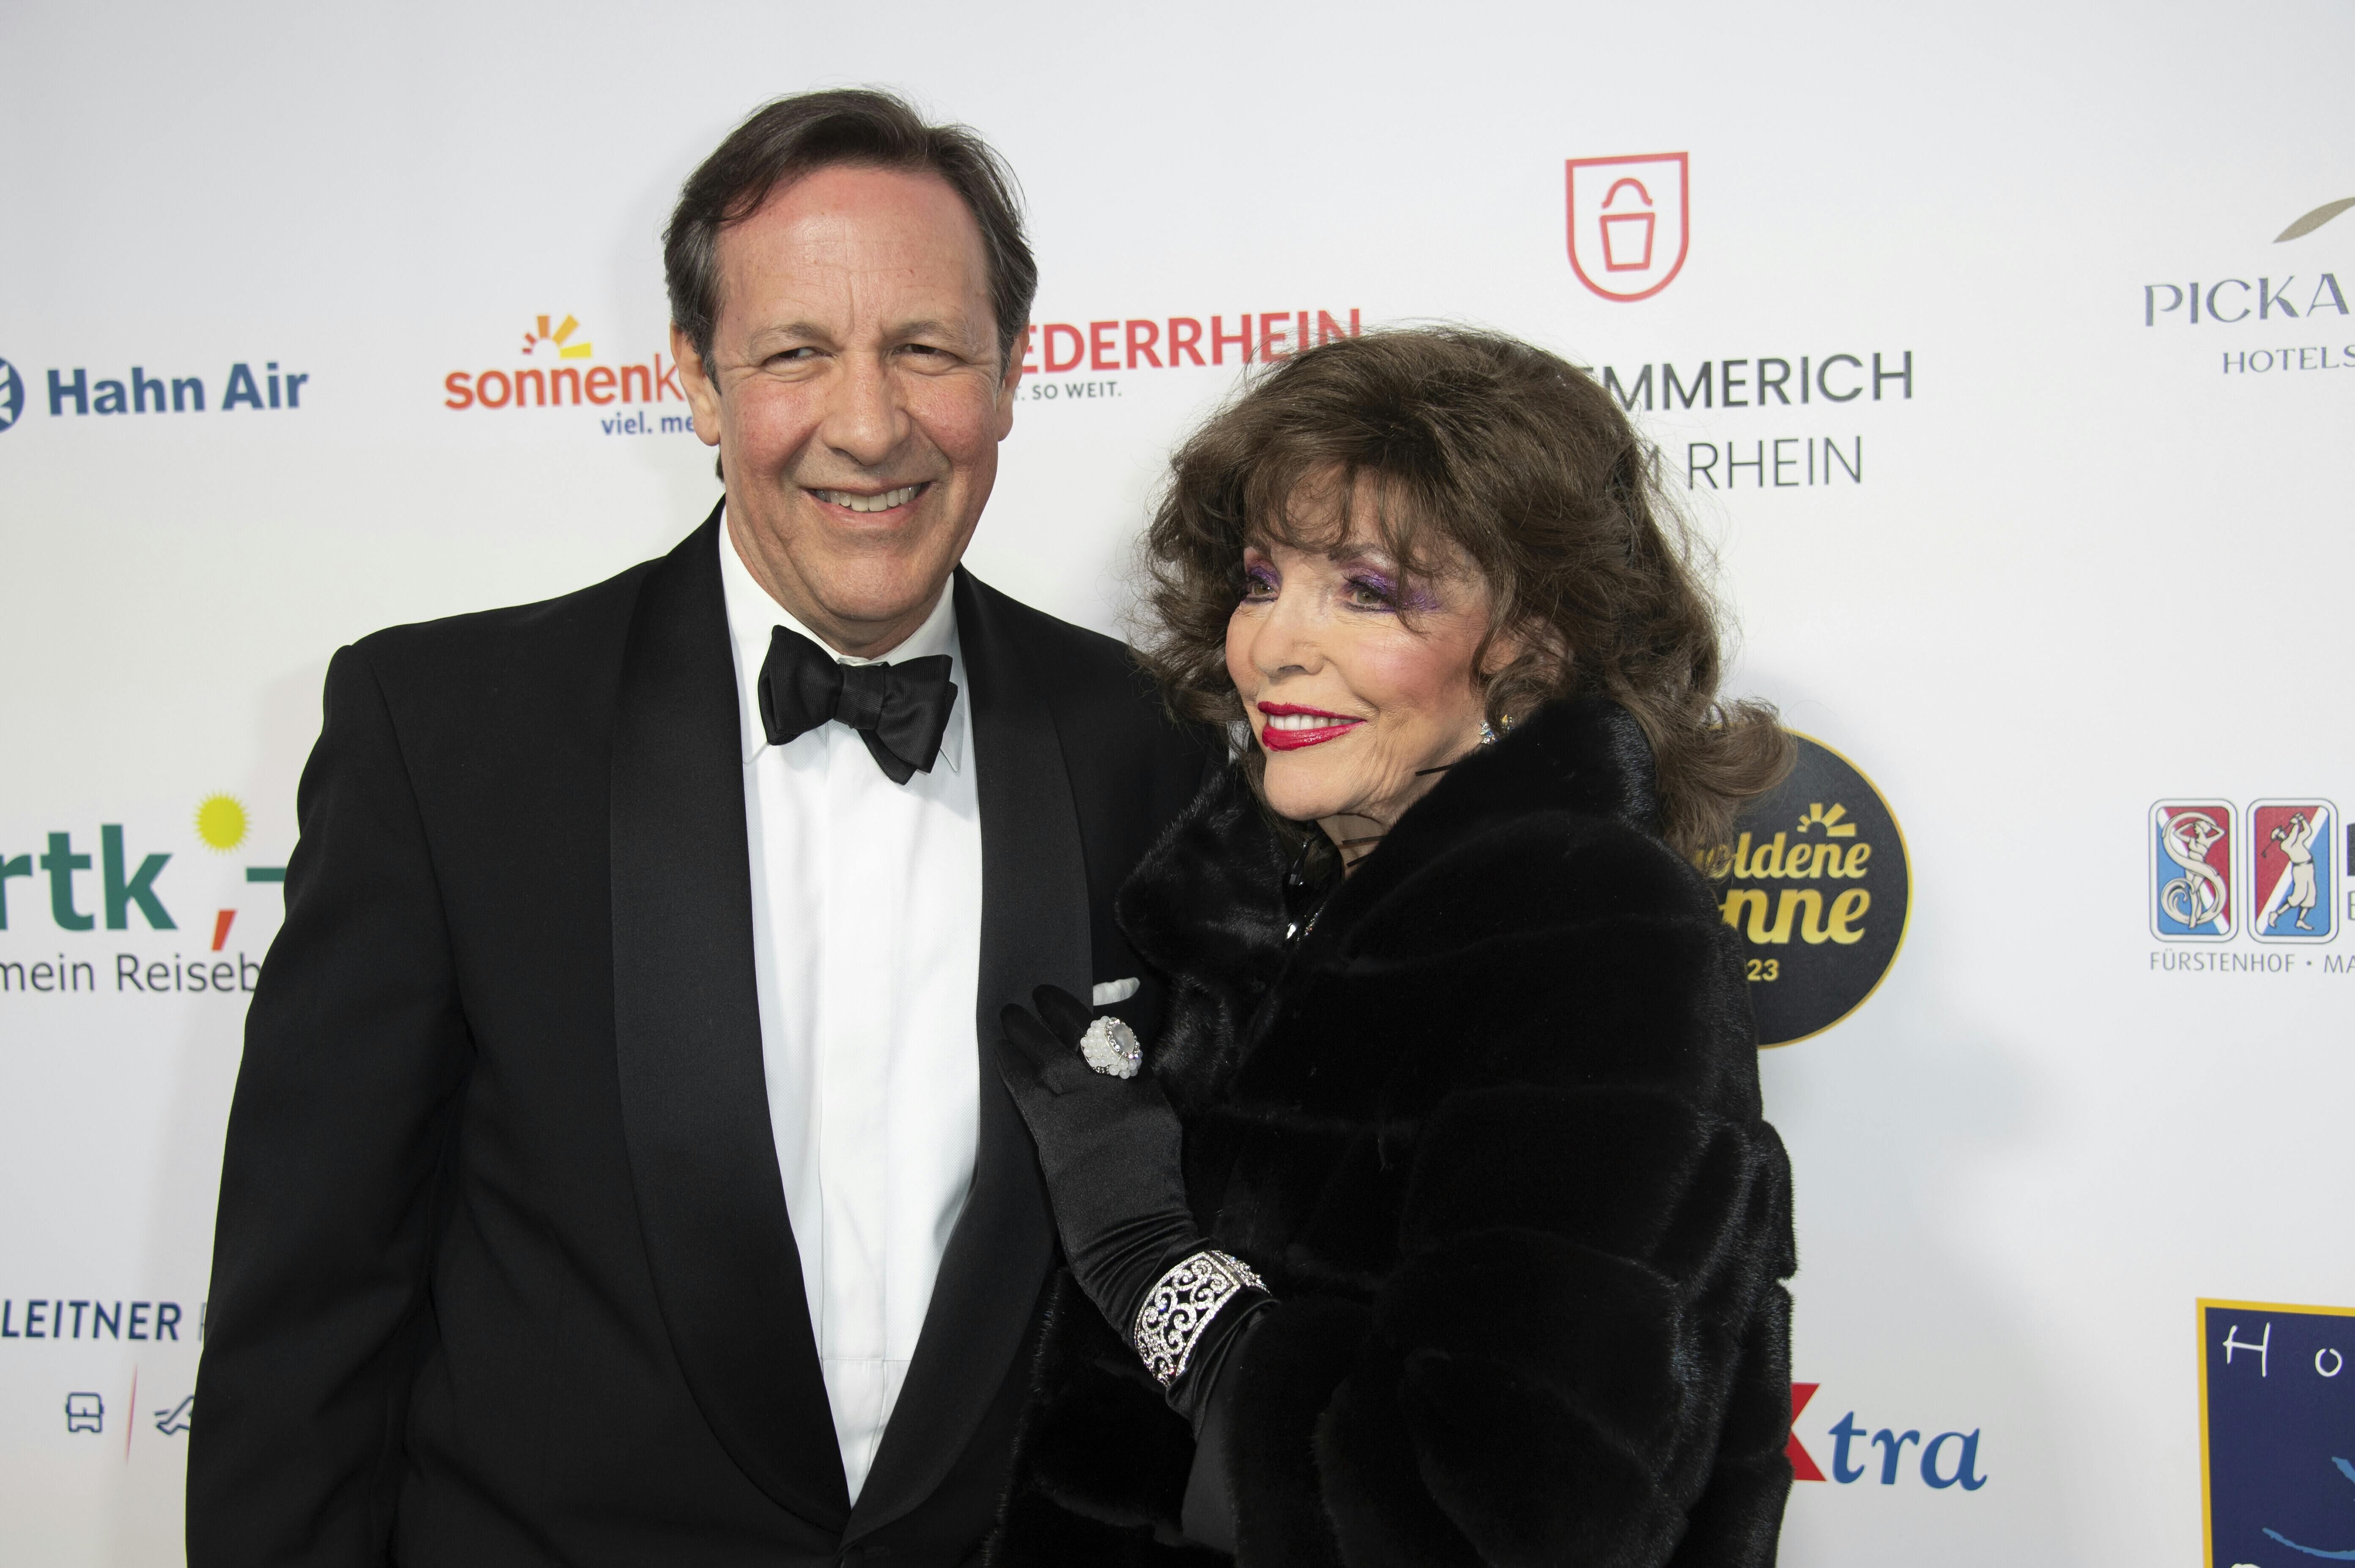 from left: actress Dame Joan COLLINS, with husband Percy GIBSON, red carpet, Red Carpet Show, arrival, arrival, Die Goldene Sonne 2023, on April 22, 2023 in Wunderland Kalkar, Photo by: Malte Ossowski/SVEN SIMON/picture-alliance/dpa/AP Images